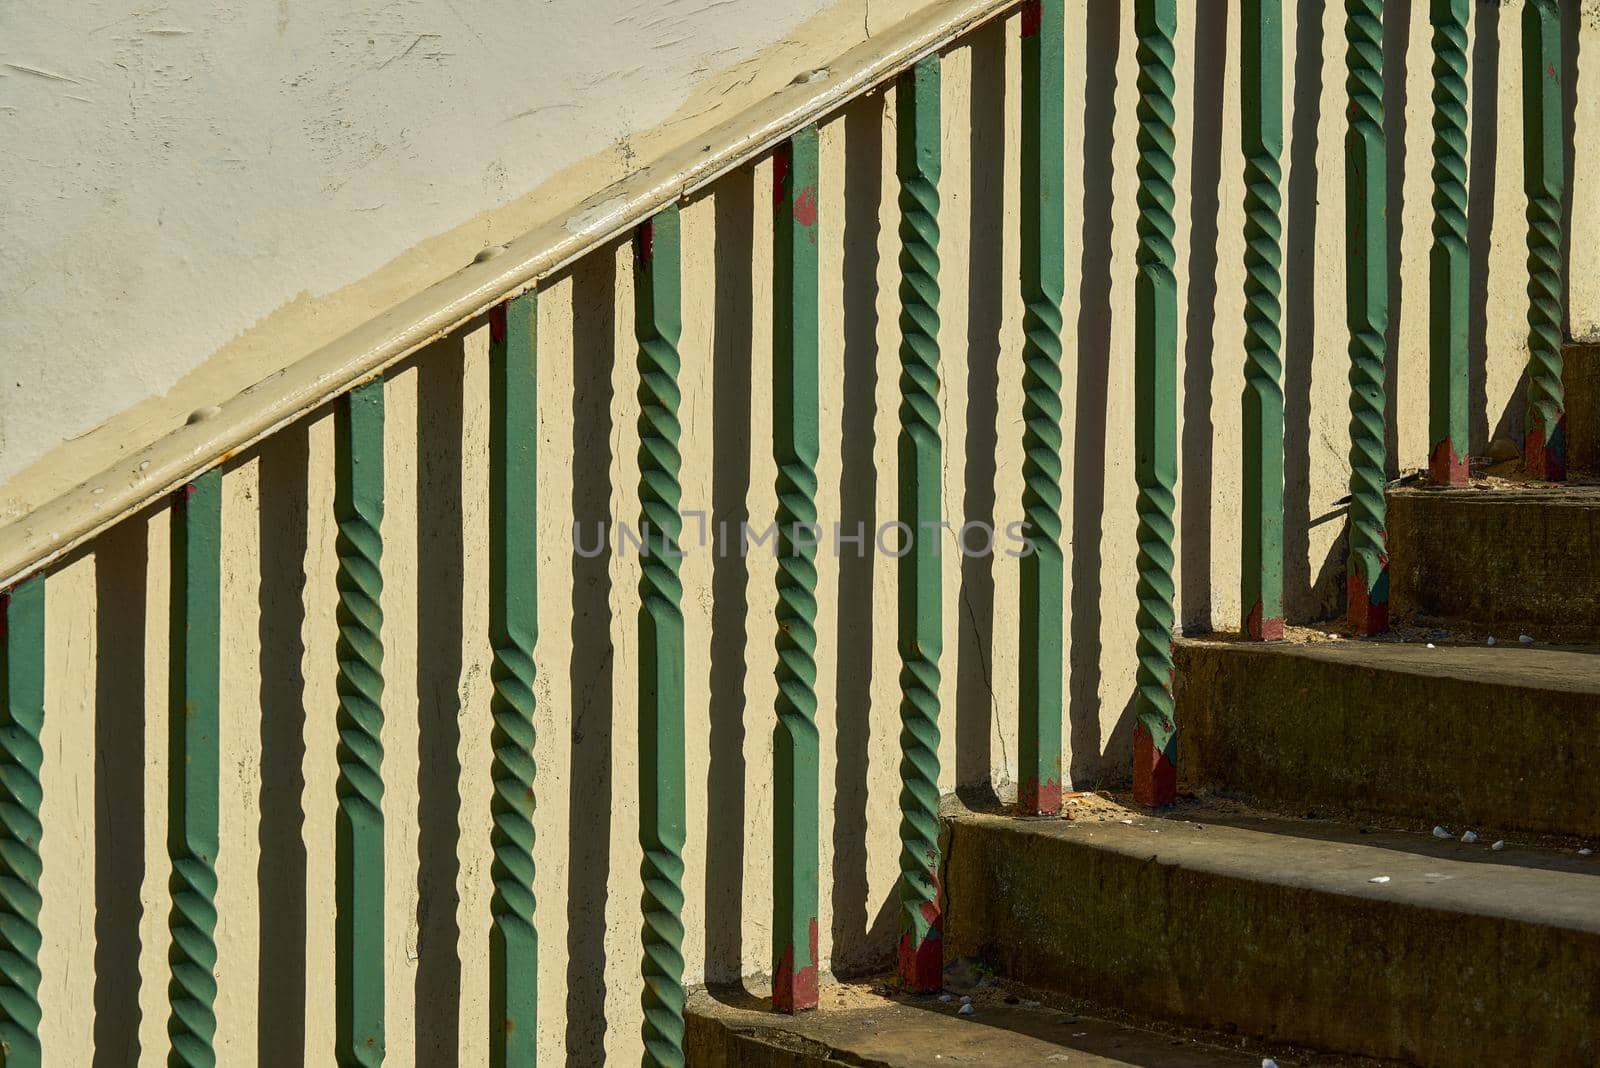 An abstract photograph of green metal railings and concrete steps